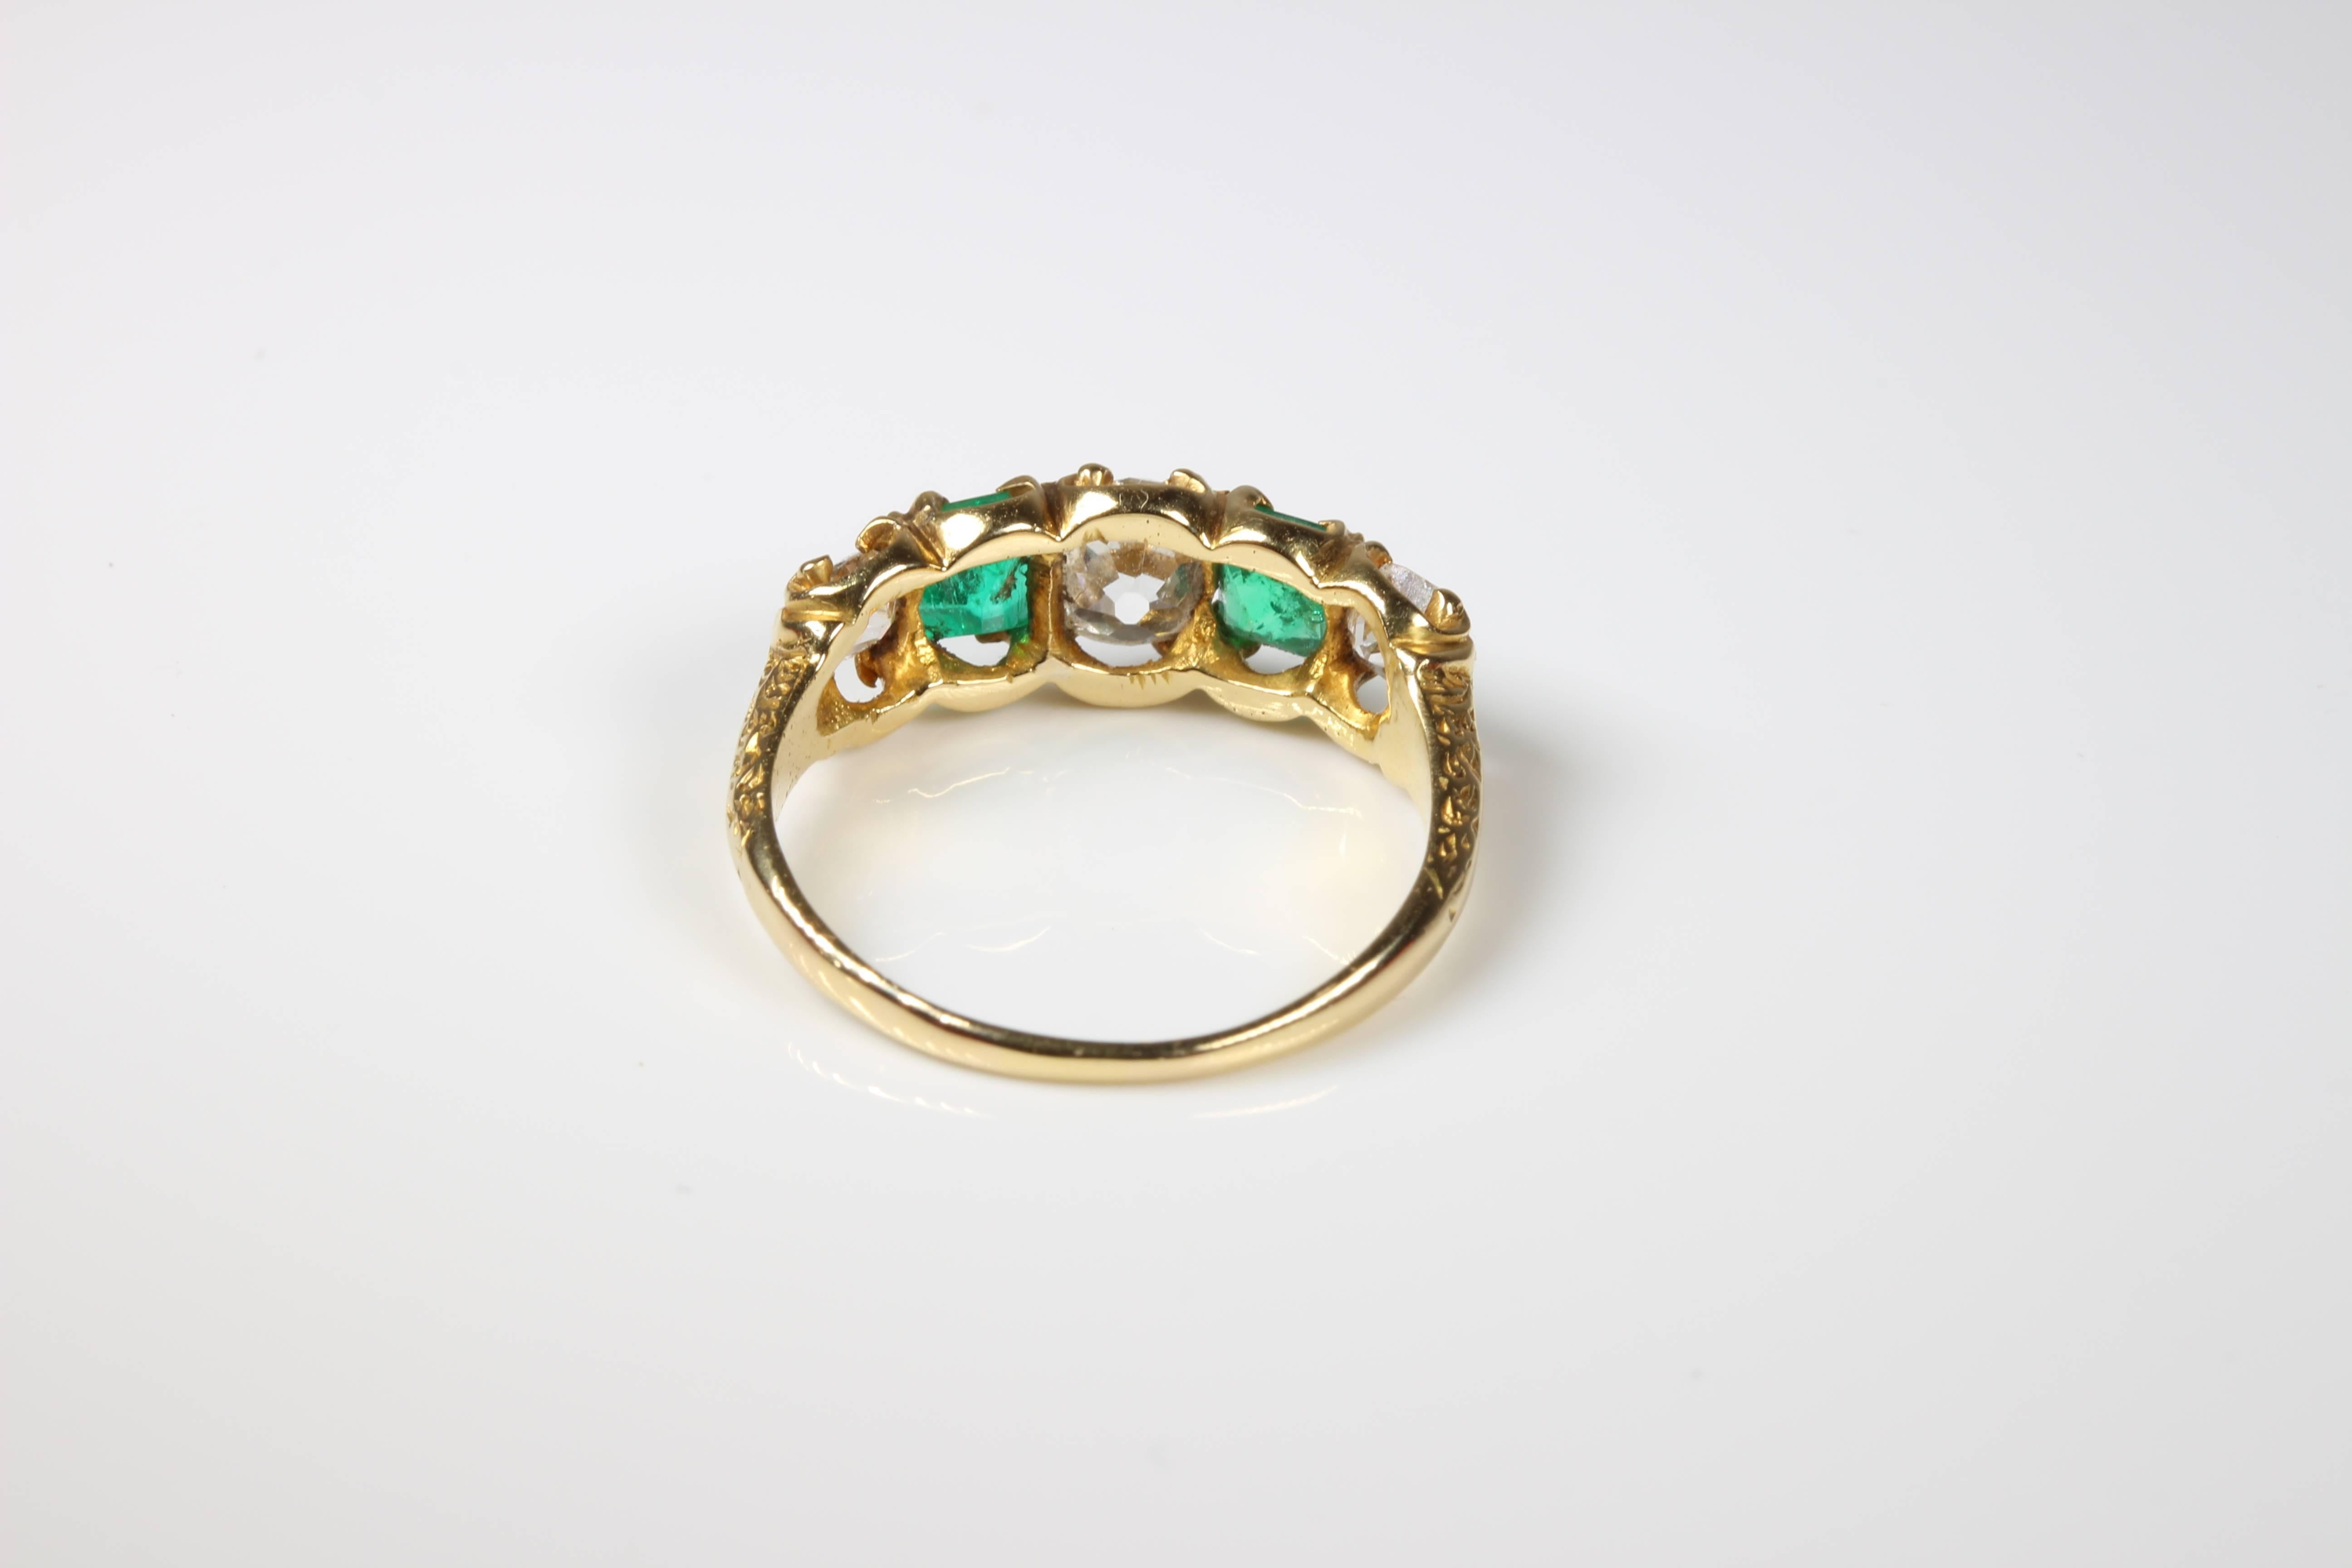 Circa 1890 18 Carat Gold Emerald Diamond Antique Victorian Engagement Ring In Excellent Condition For Sale In Perth, AU